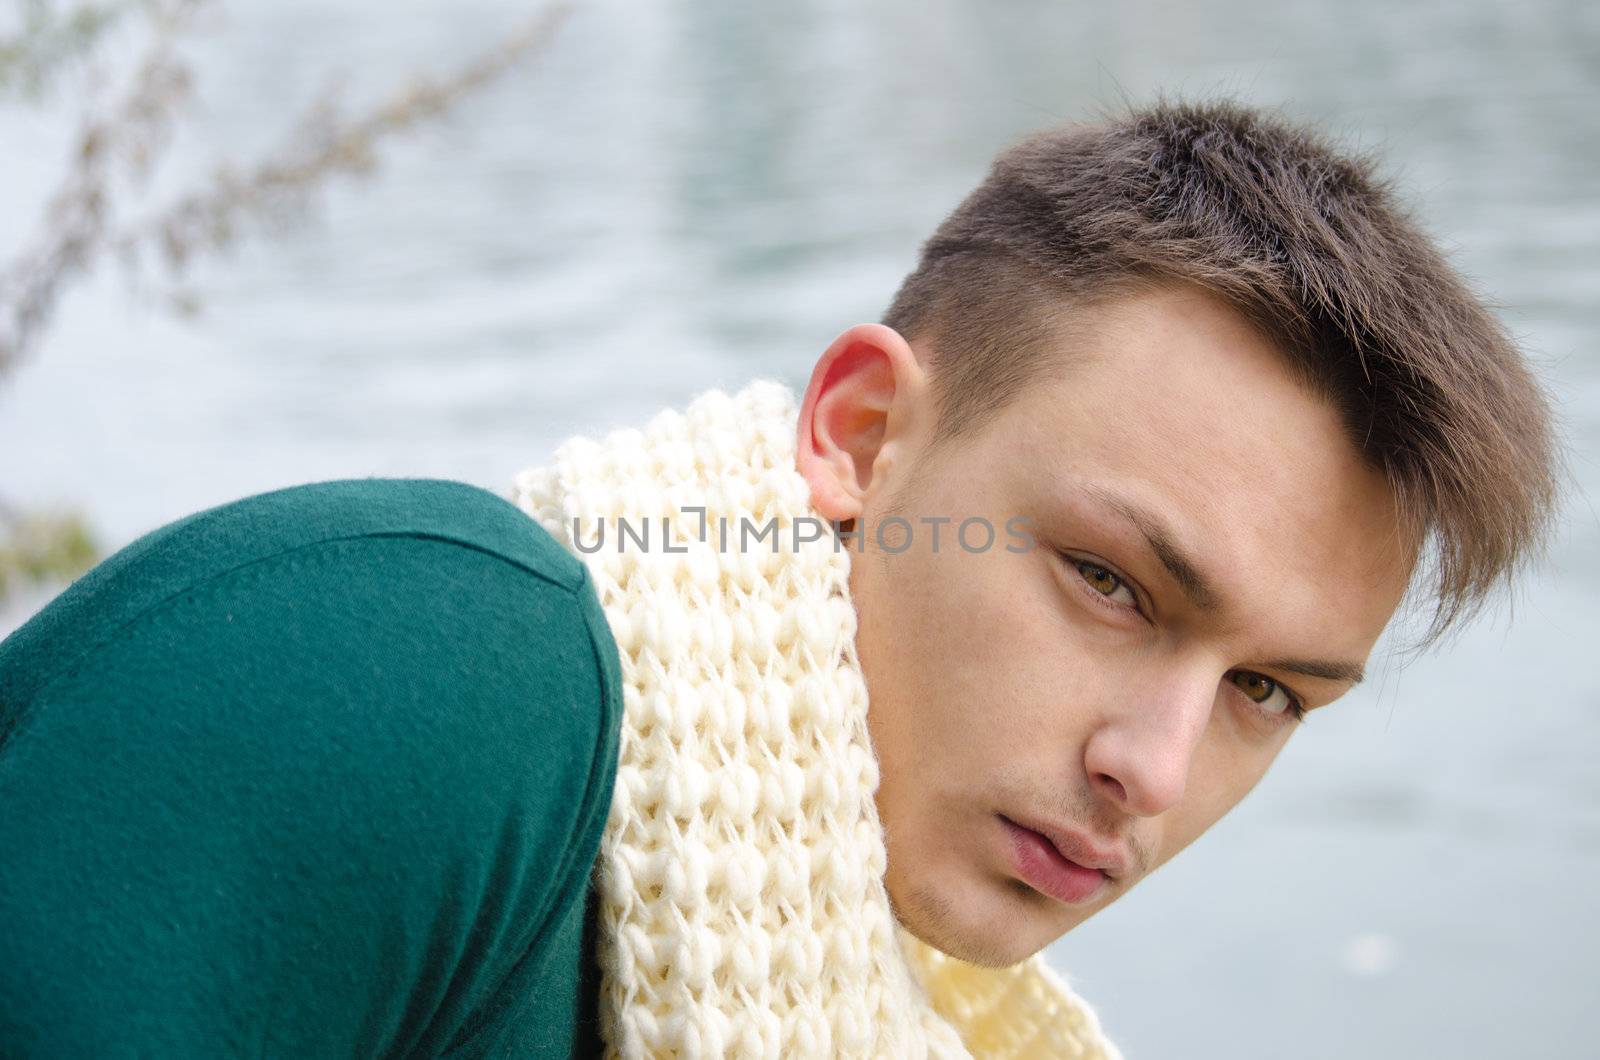 Good looking young man outdoors in nature (river, lake)